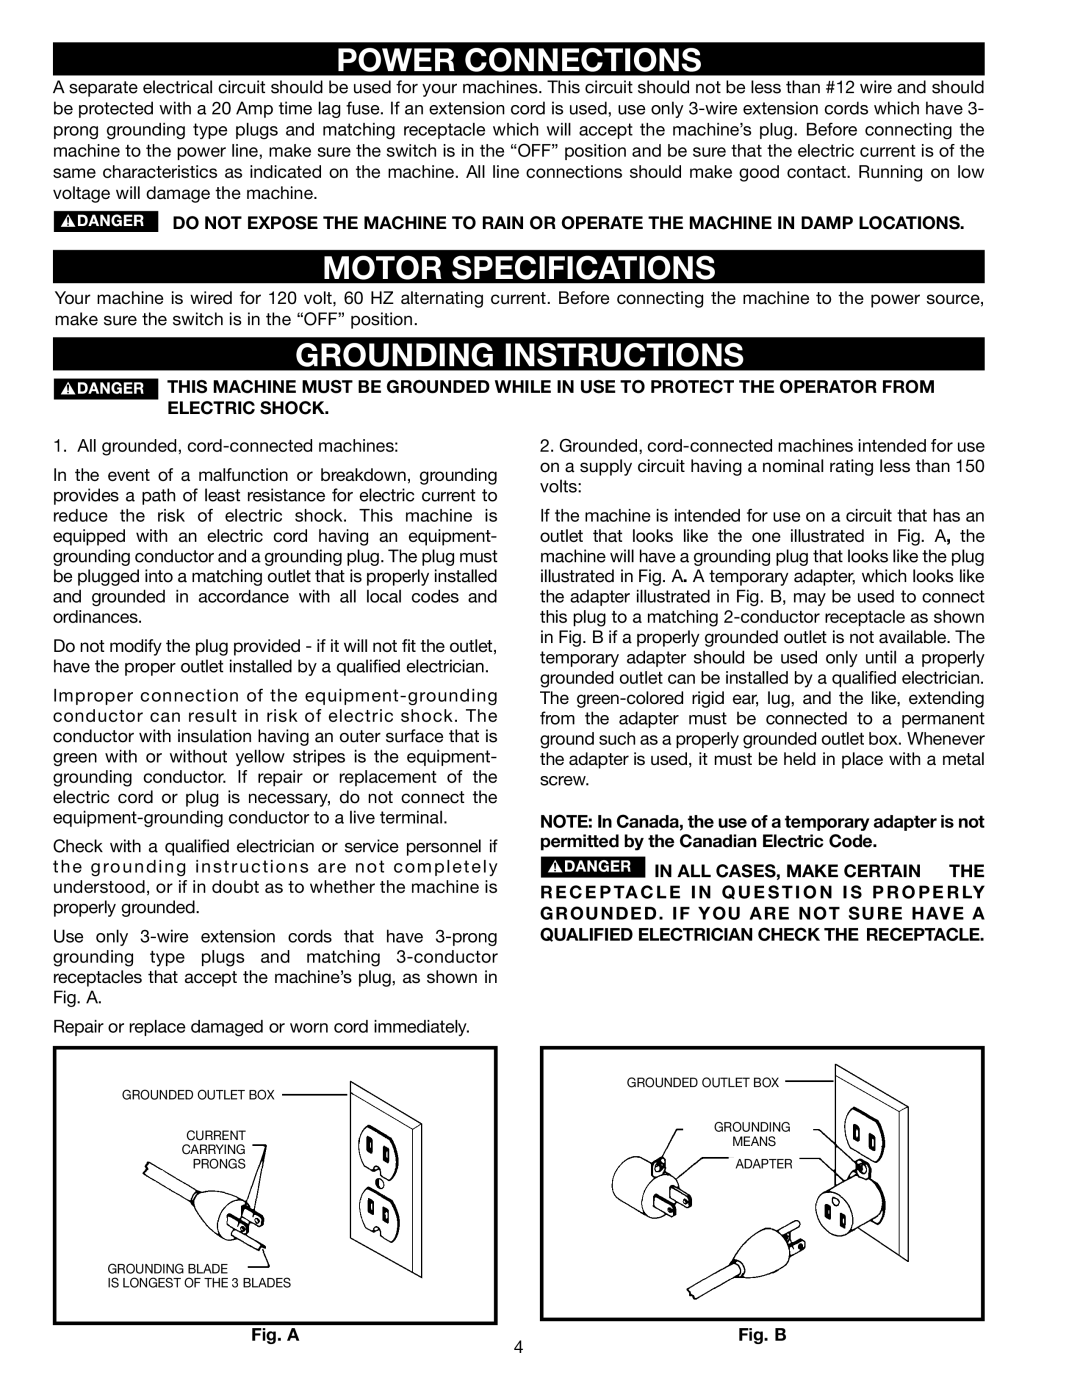 Porter-Cable 909516, 1400 instruction manual Power Connections, Motor Specifications, Grounding Instructions 